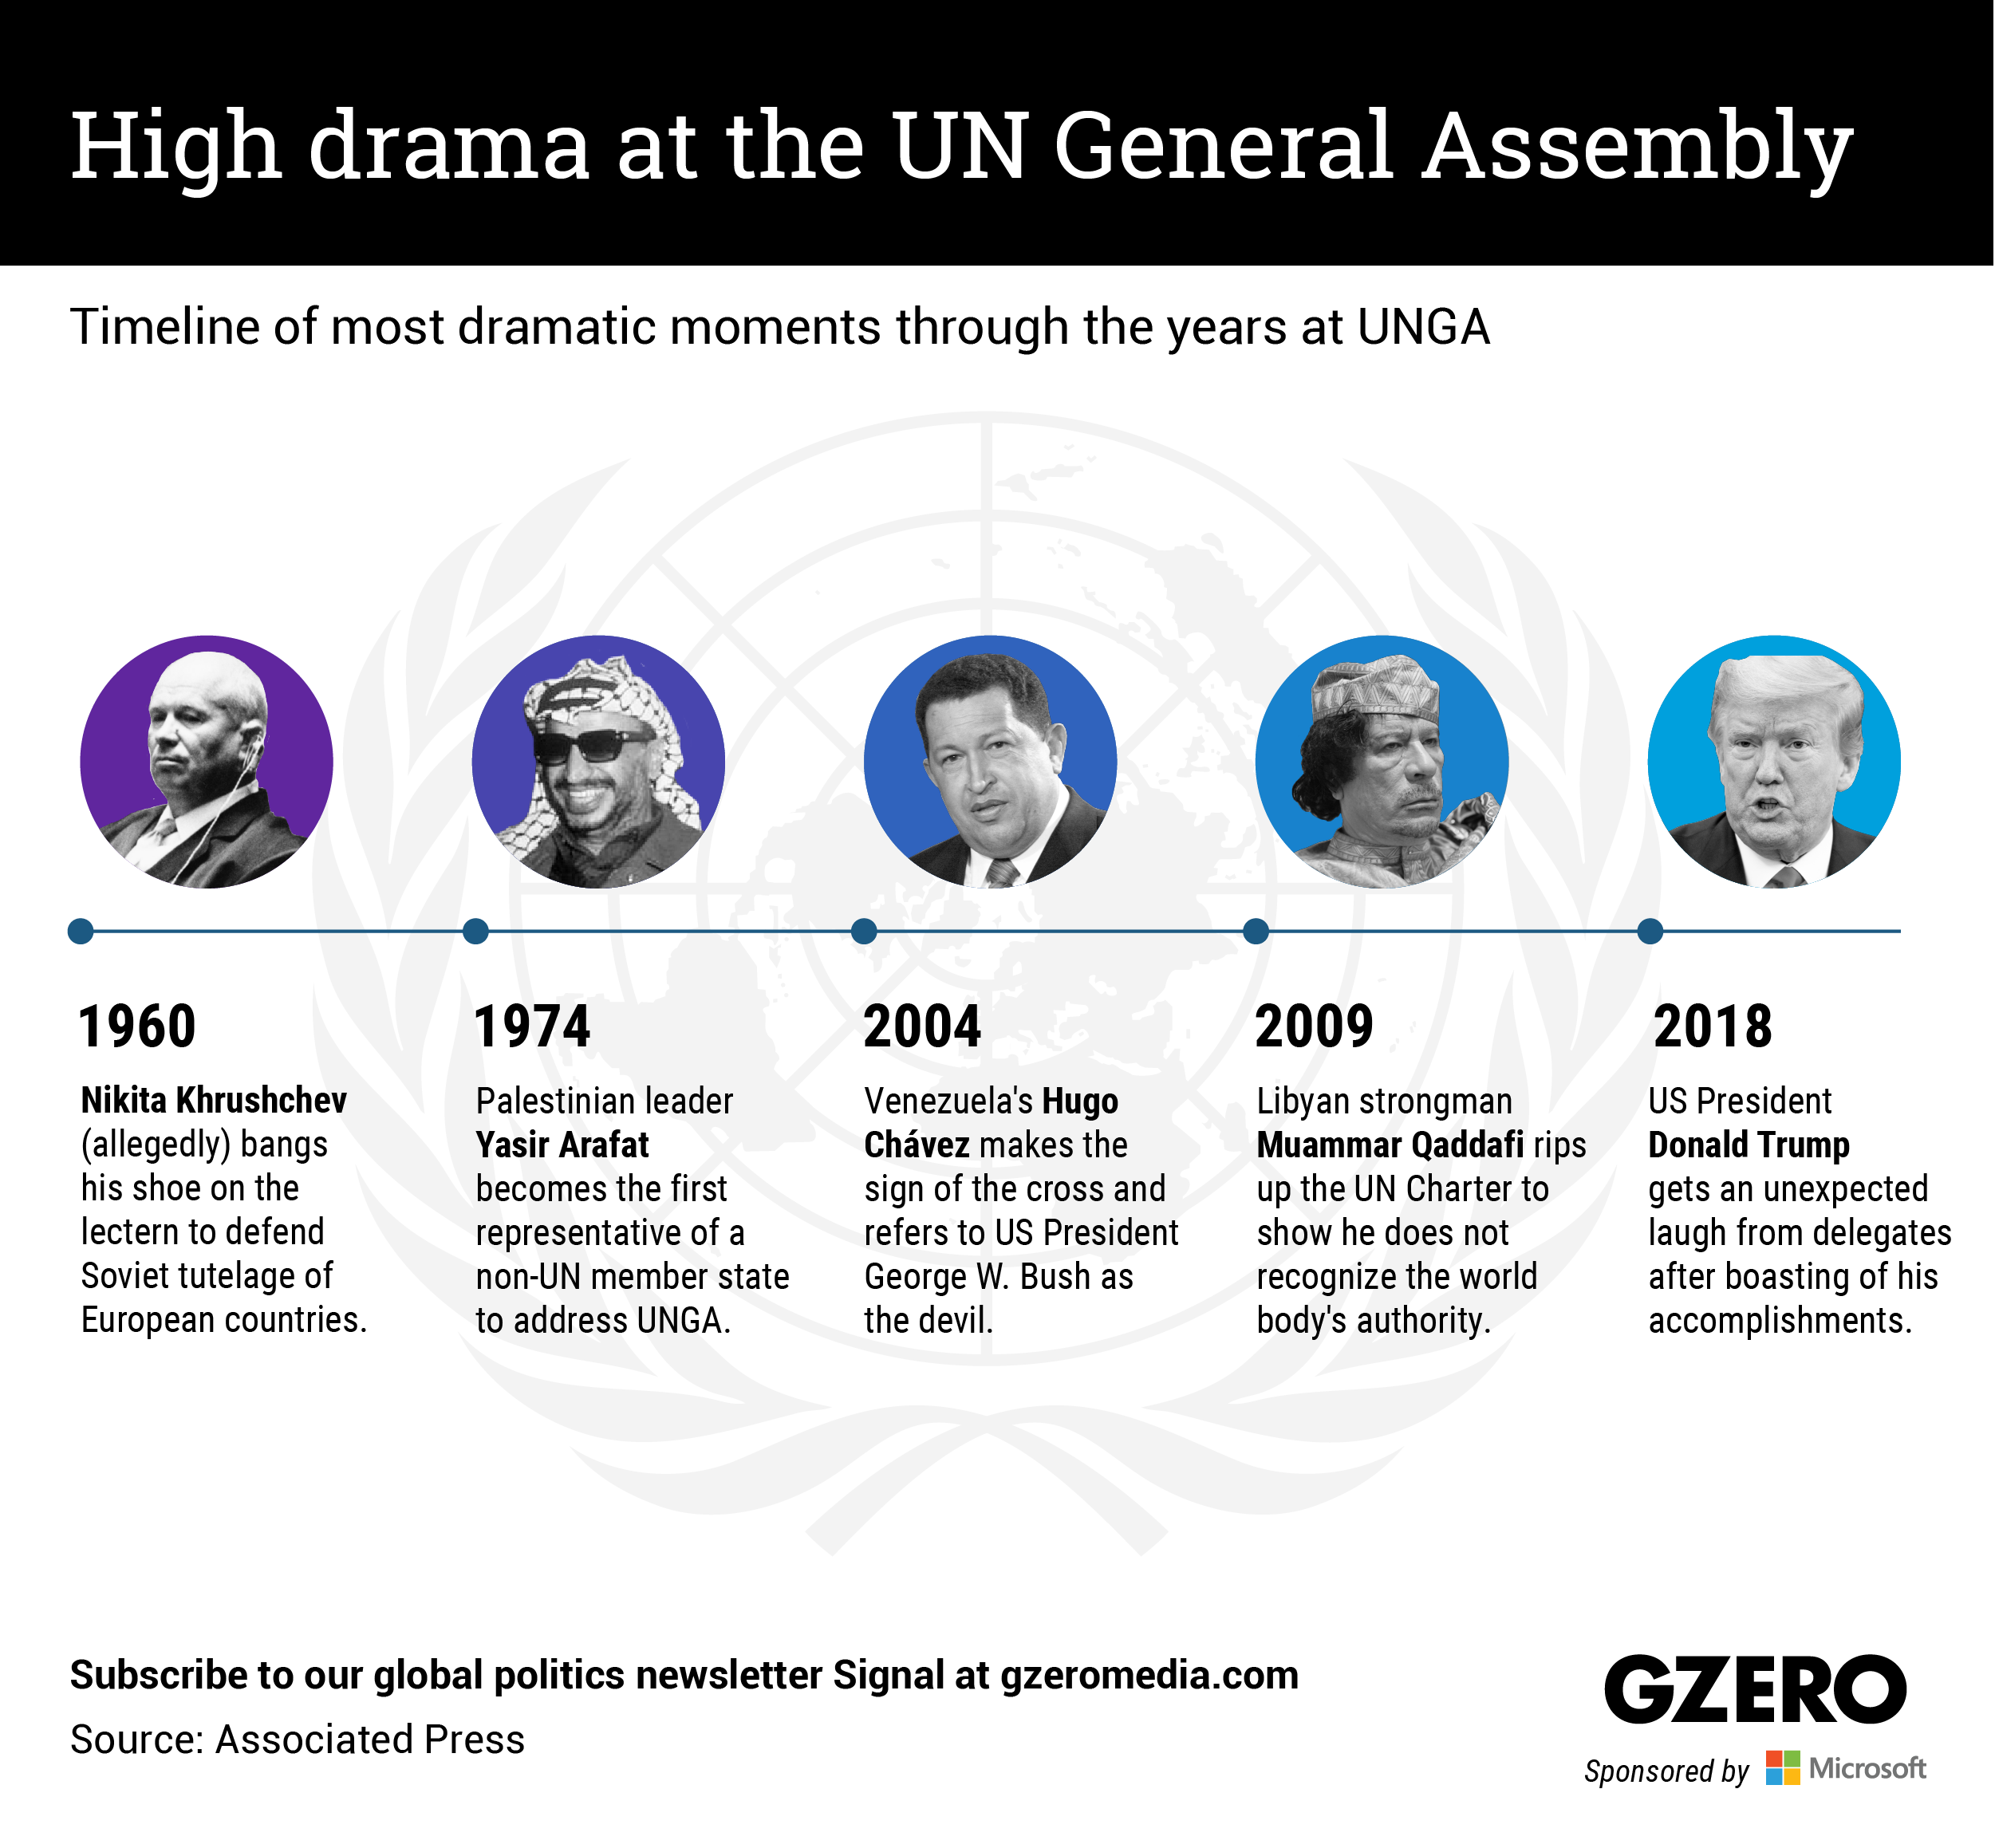 The Graphic Truth: High drama at the UN General Assembly